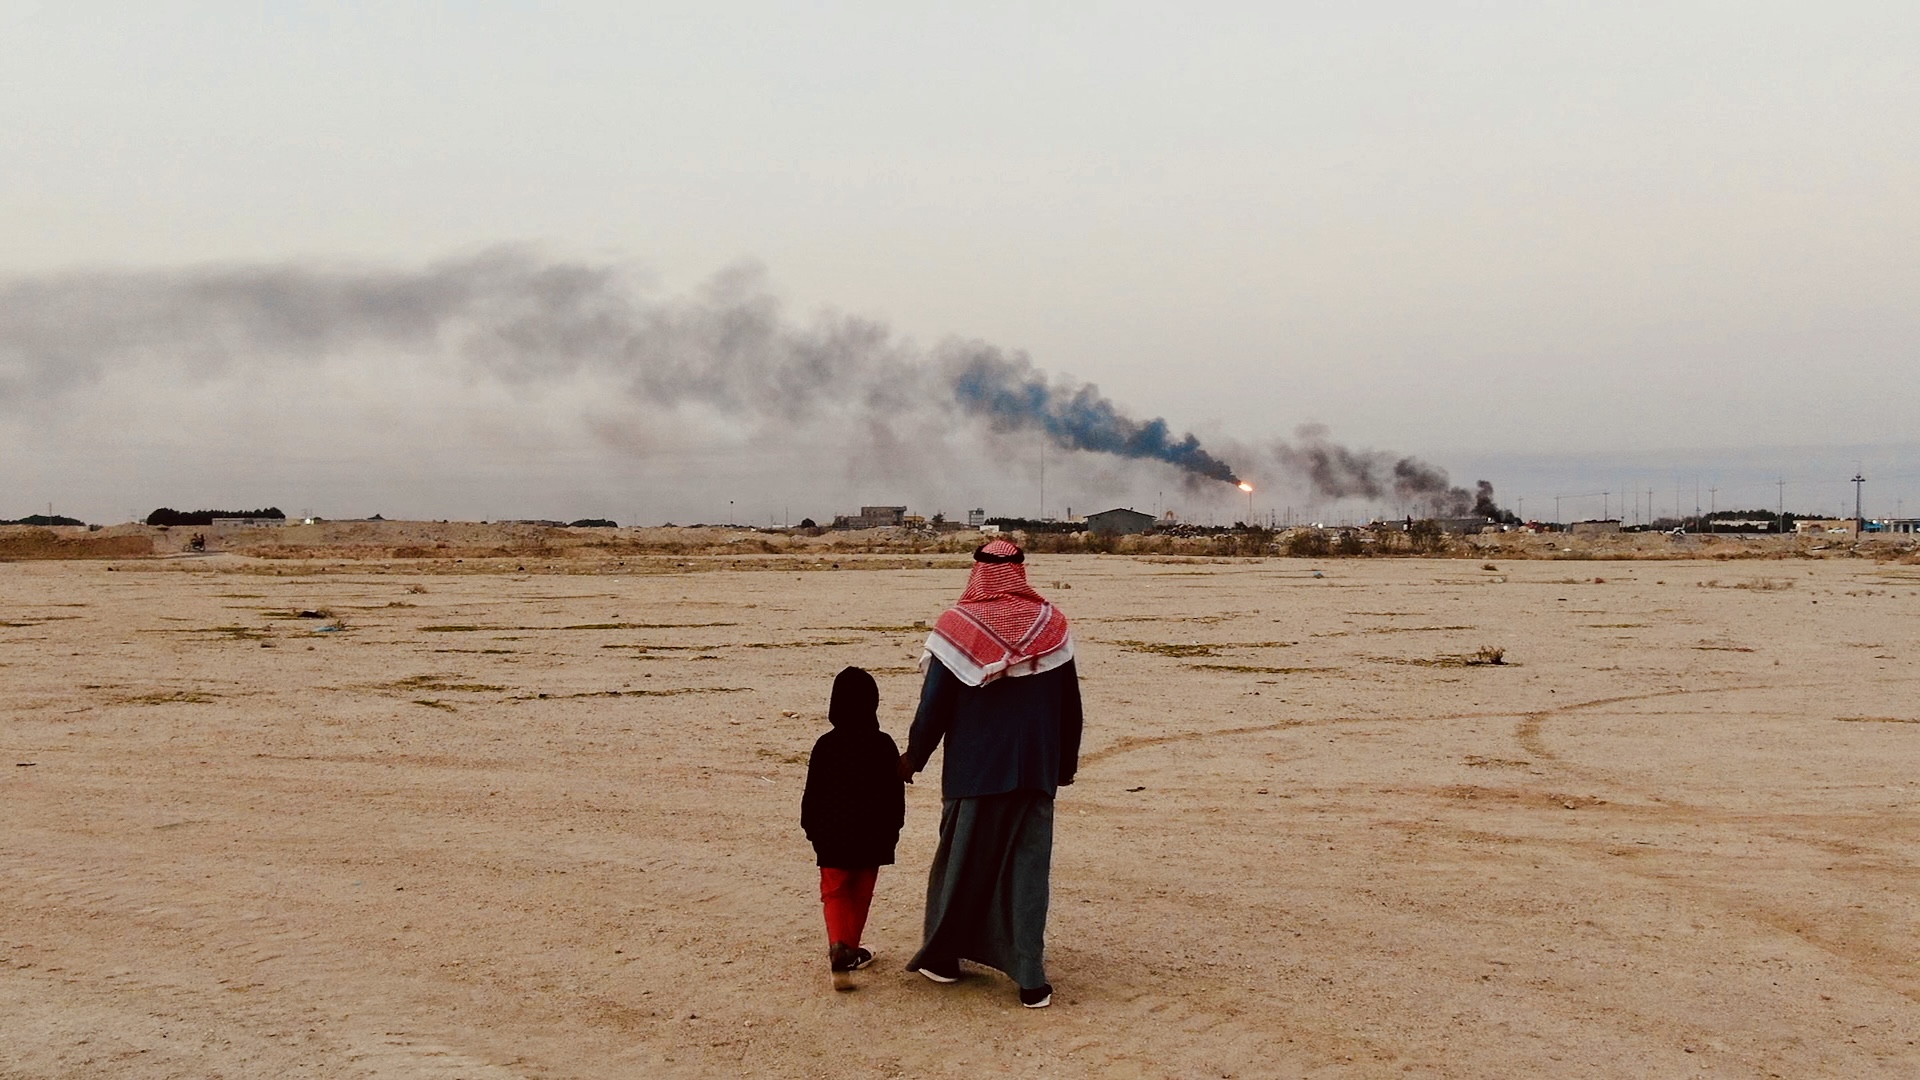 Fatima’s father, Hasan, holding hands with one of his daughters, looks out at flare stacks near his family’s home.